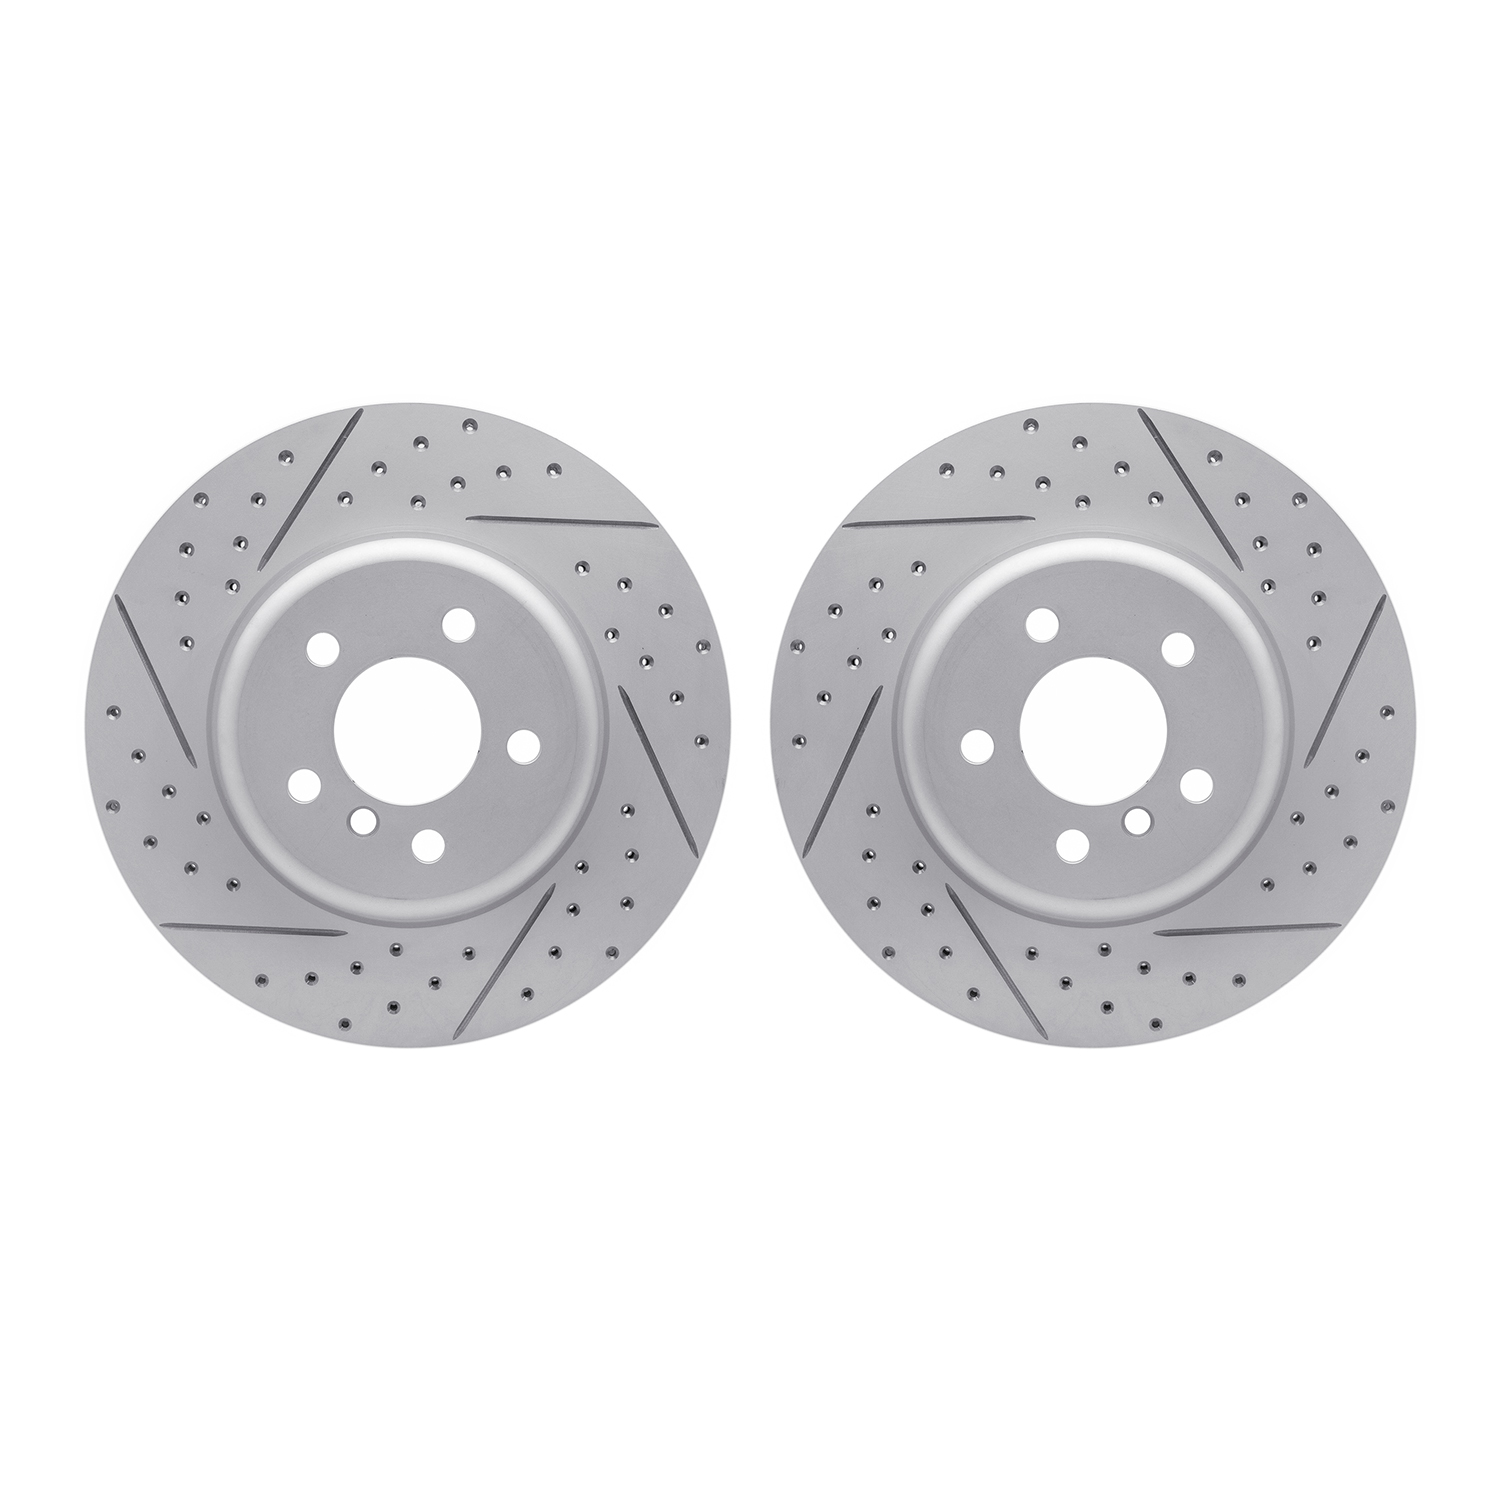 2002-31078 Geoperformance Drilled/Slotted Brake Rotors, 2010-2019 BMW, Position: Rear